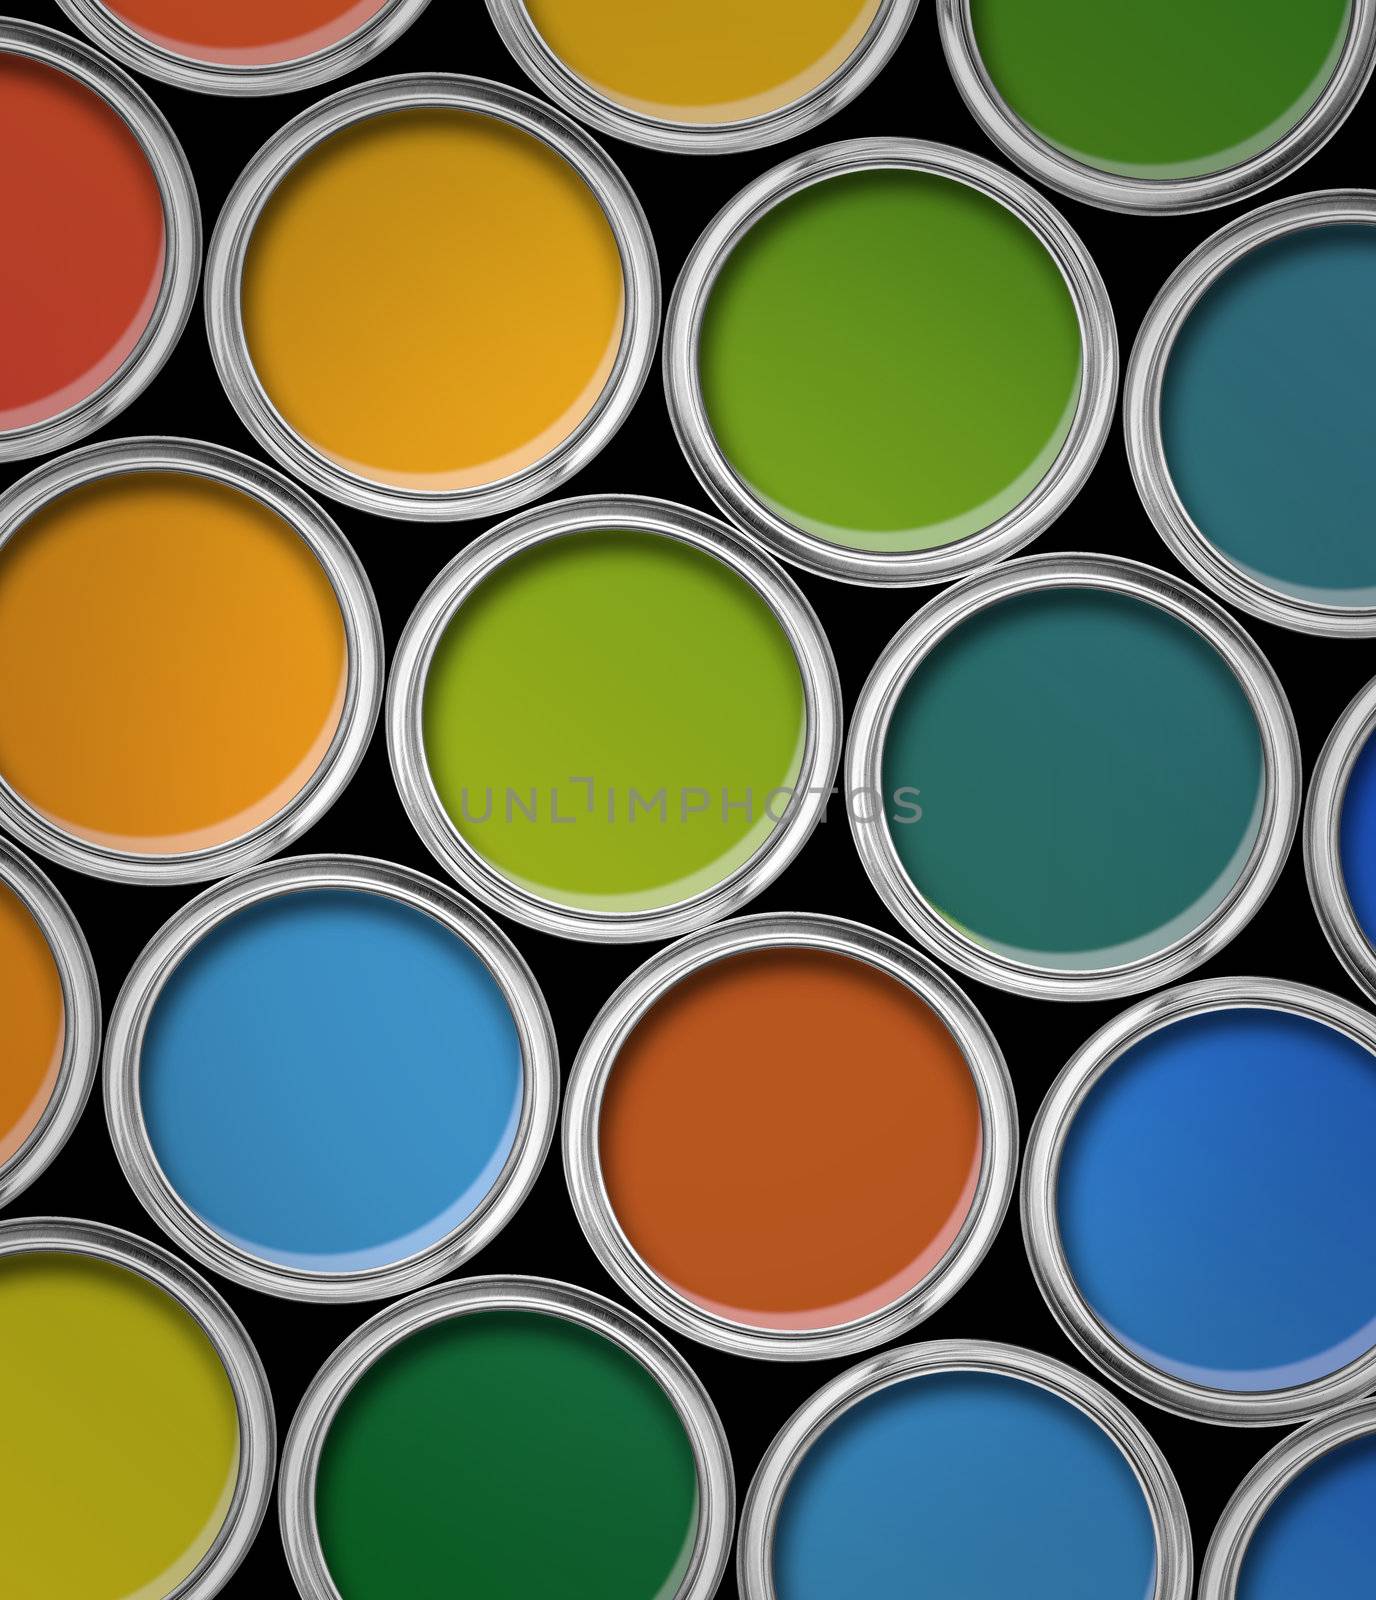 Paint tin color chart, cans opened top view, isolated on black